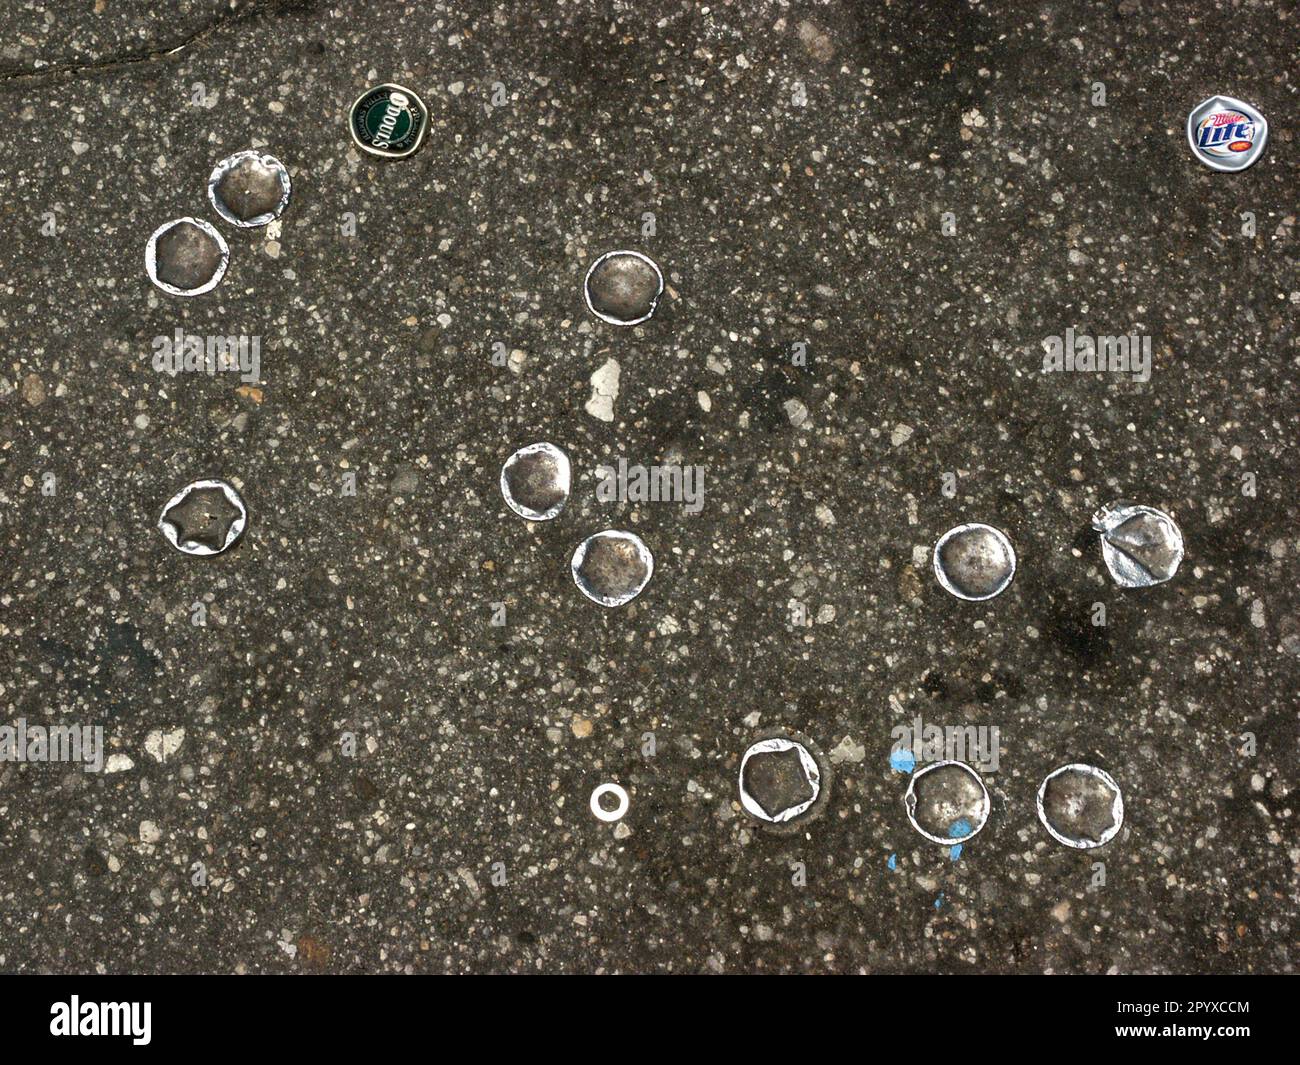 Bottlecaps in front of a convenience store, flattened and embedded into pavement after being run over by vehicles. Stock Photo